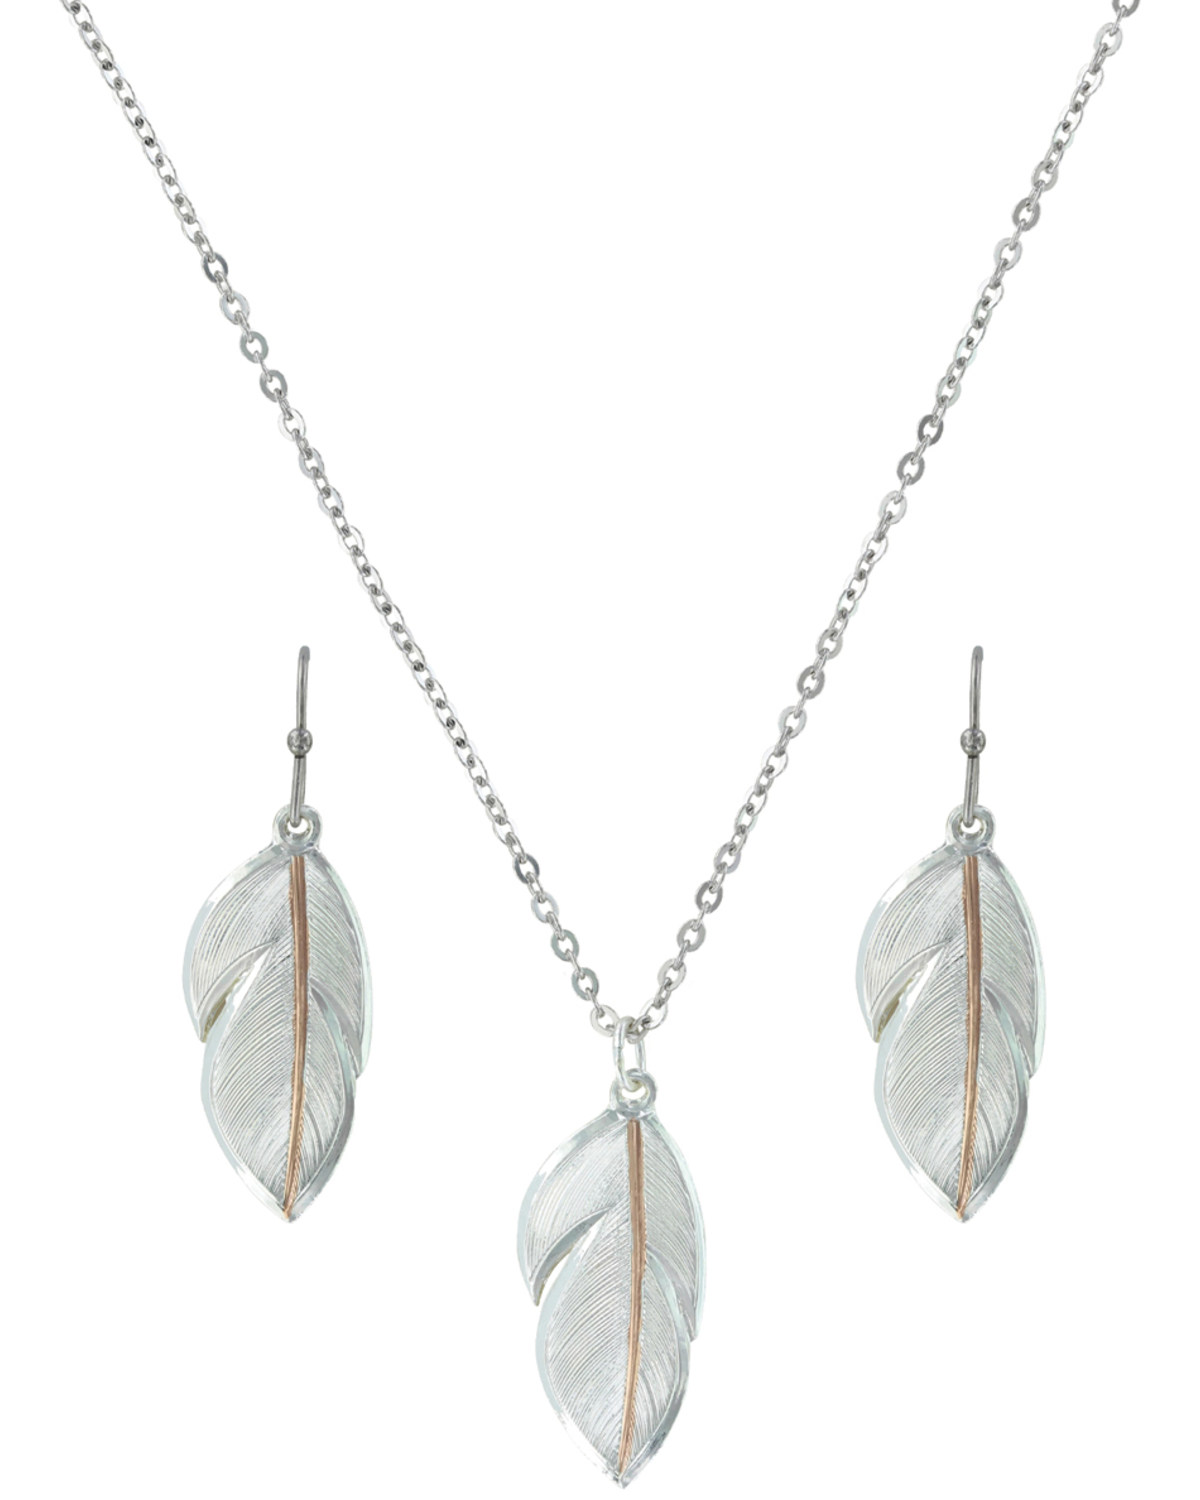 Montana Silversmiths Women's Downy Feather Necklace & Earrings Jewelry Set *DISCONTINUED*